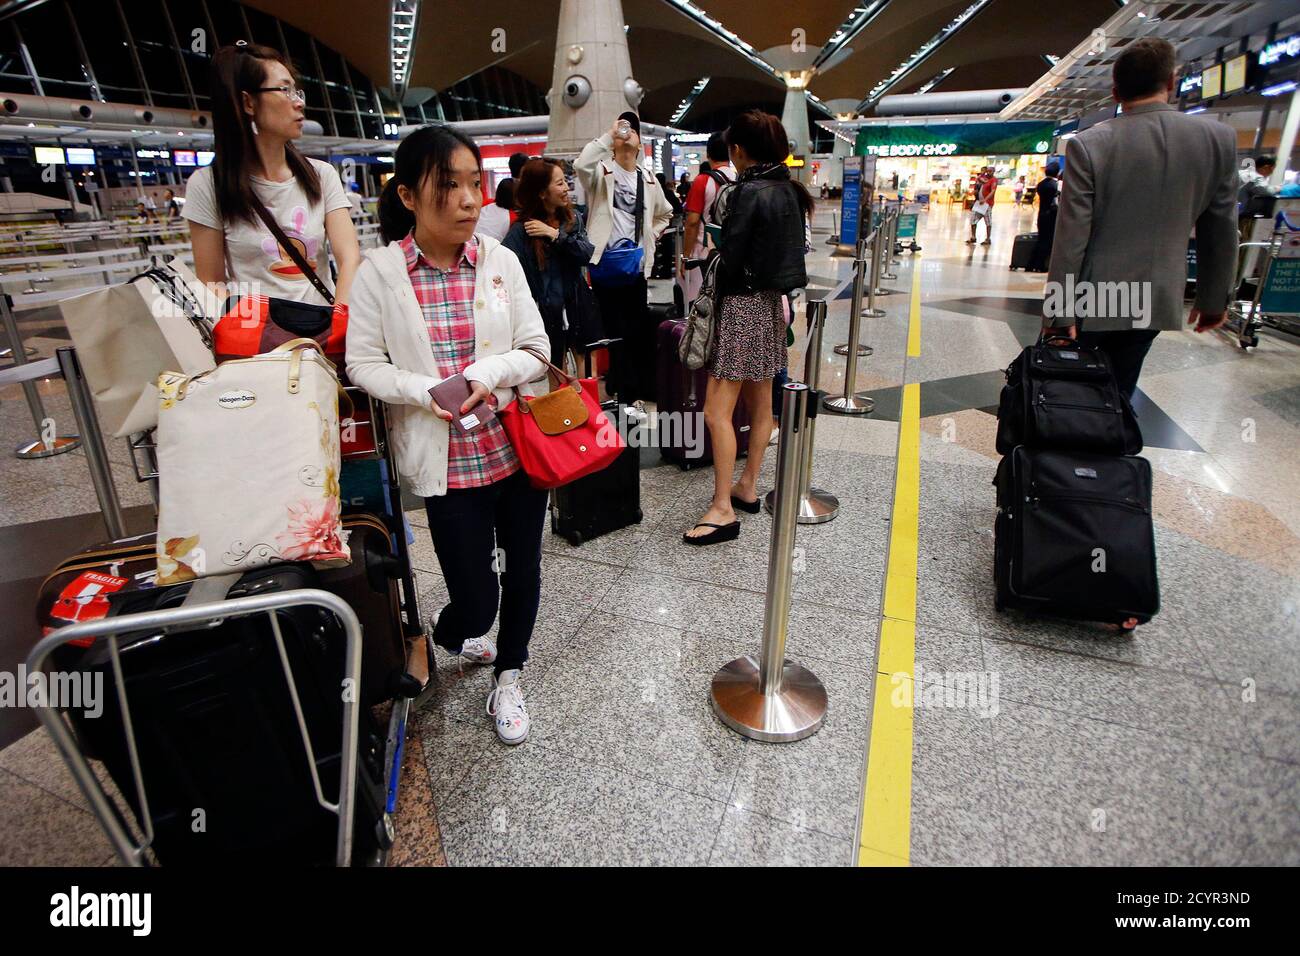 Passengers for Malaysia Airlines flight MH318 wait at the check-in counters  at Kuala Lumpur International Airport at approximately 10:45pm March 16,  2014. Malaysia Airlines flight number MH318 replaces the flight number of